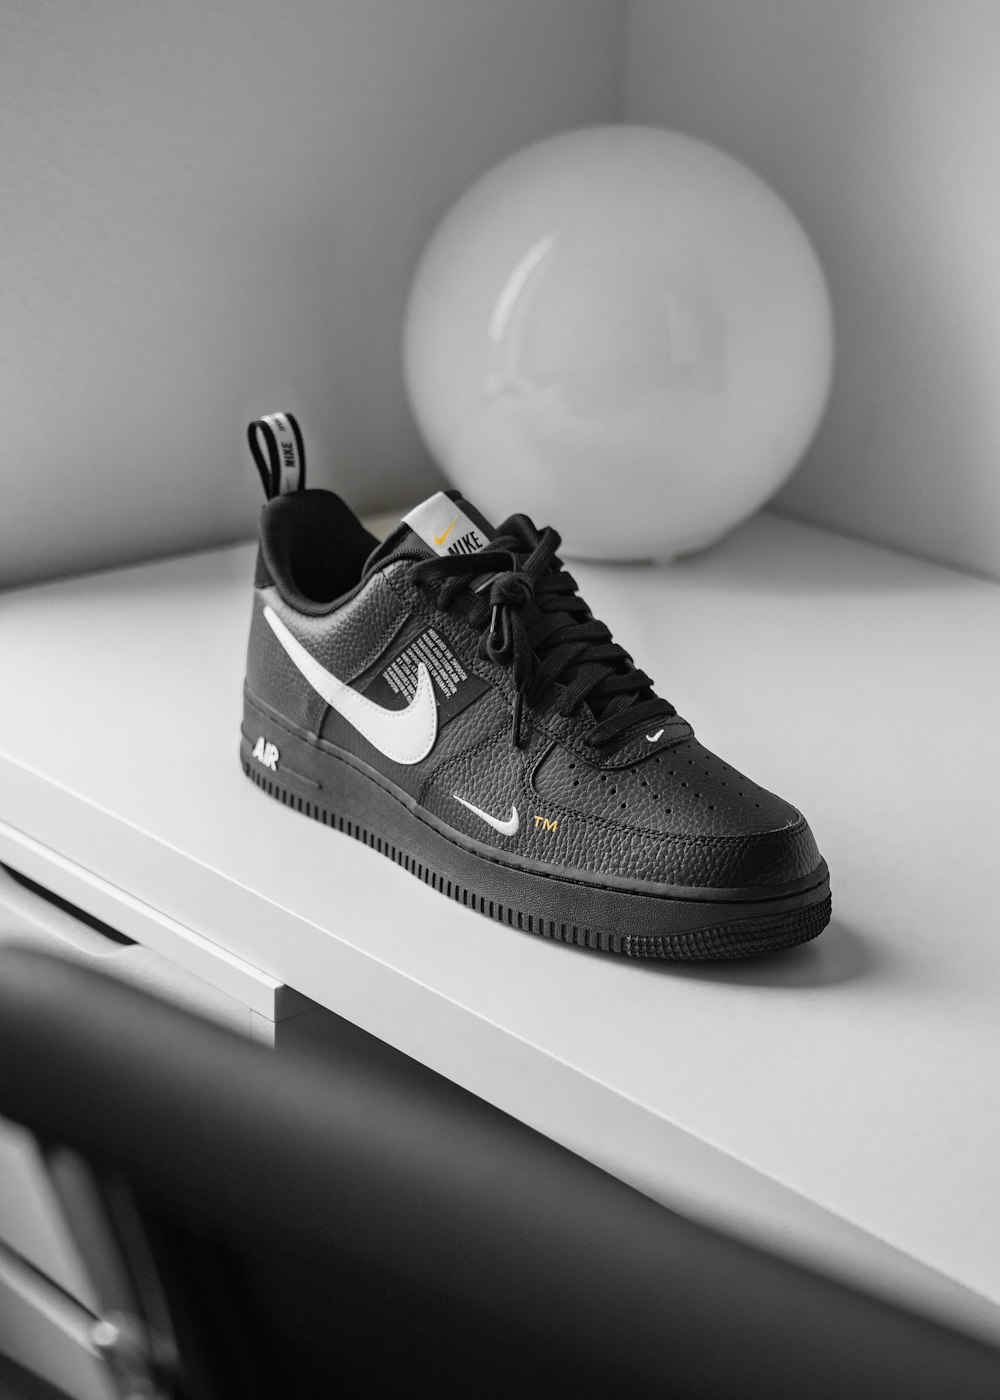 unpaired OFF WHITE X Nike Air Force 1 low-top sneaker photo – Free Shoes  Image on Unsplash